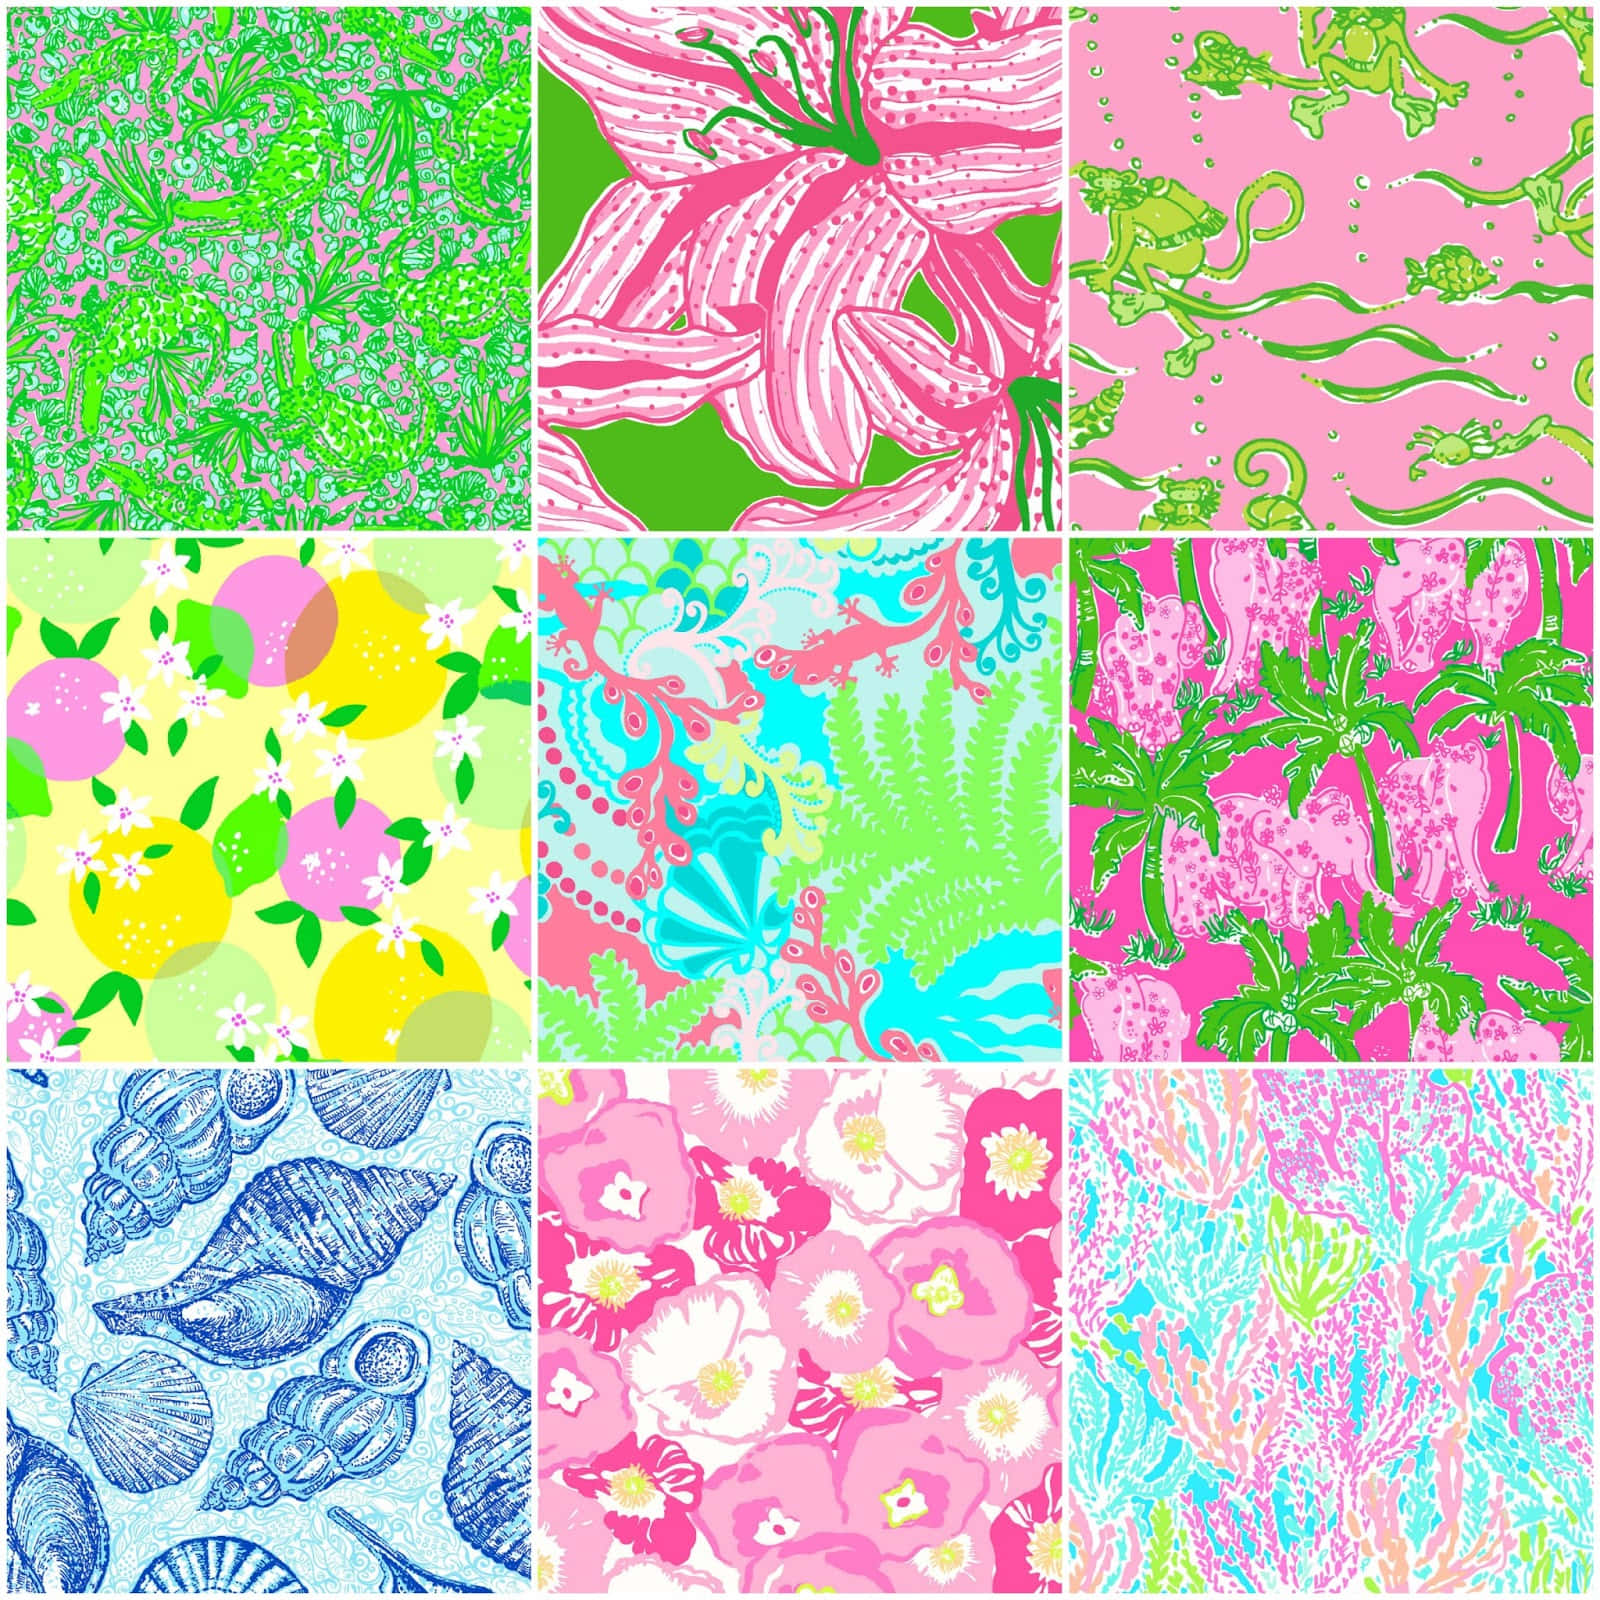 Lilly Pulitzer — Ready for Summer in Cool Colorful Prints